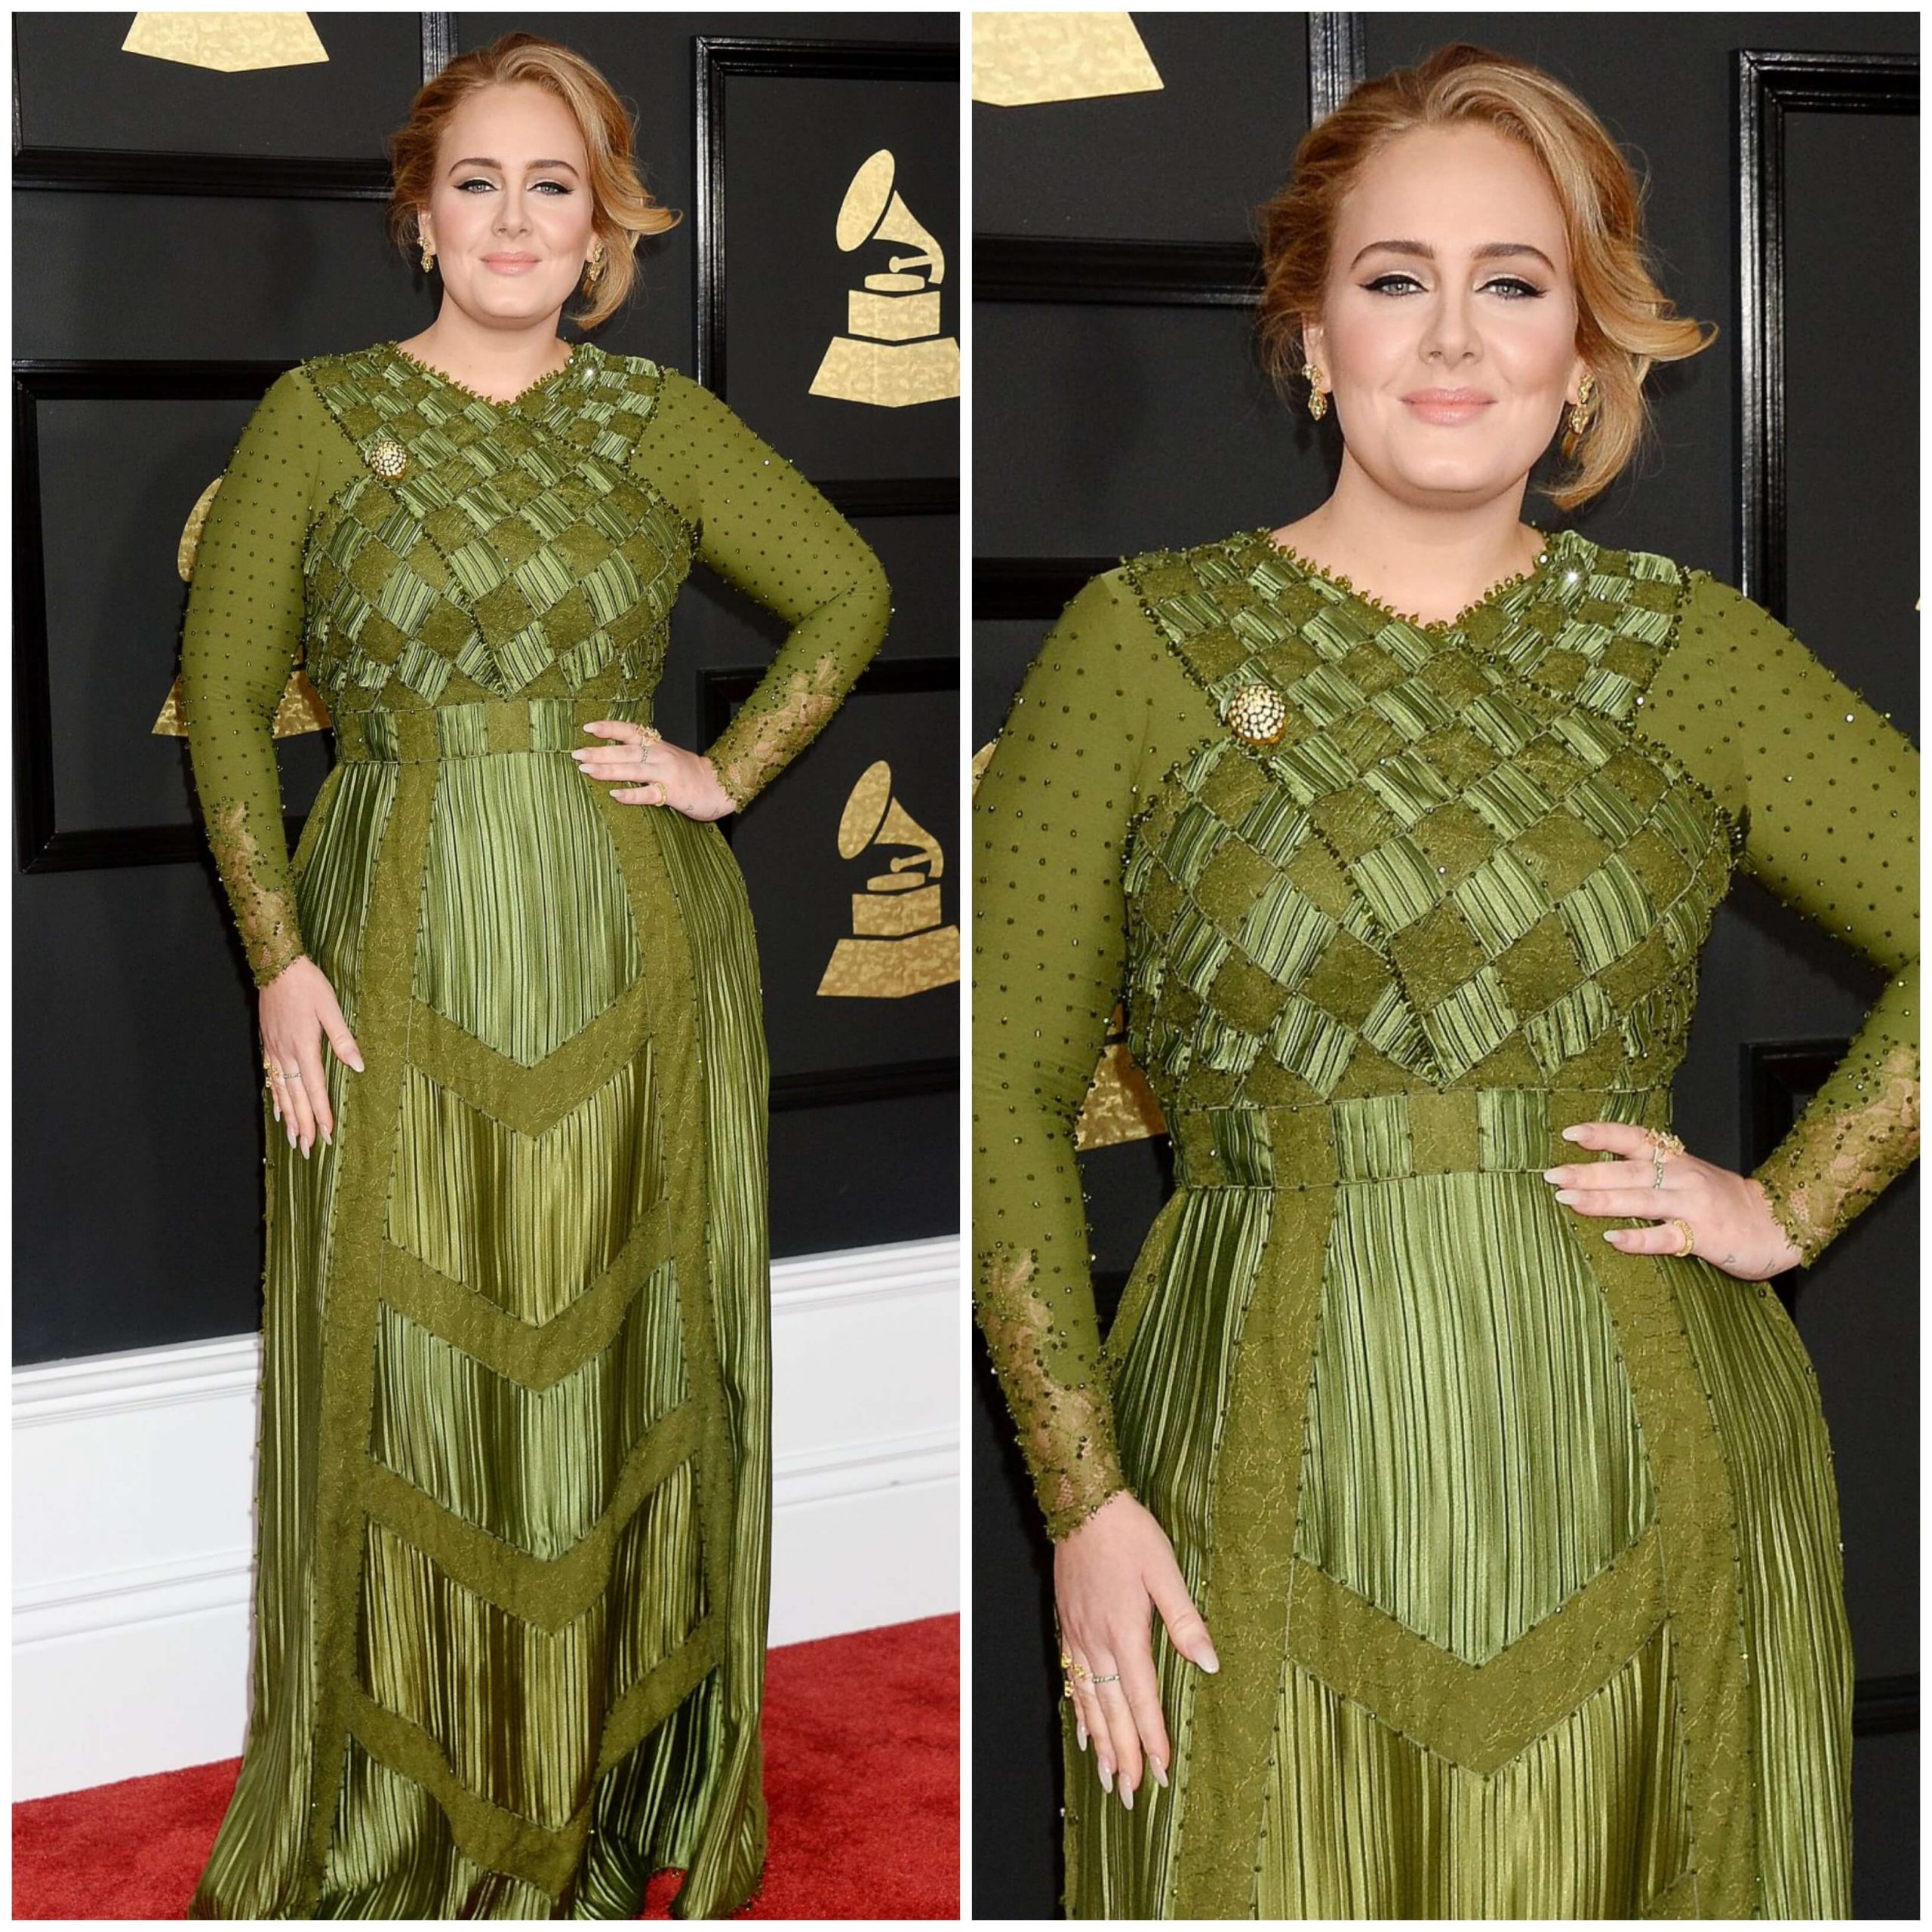 Adele Stunning Look In Green Haute Couture Dress at GRAMMY Awards